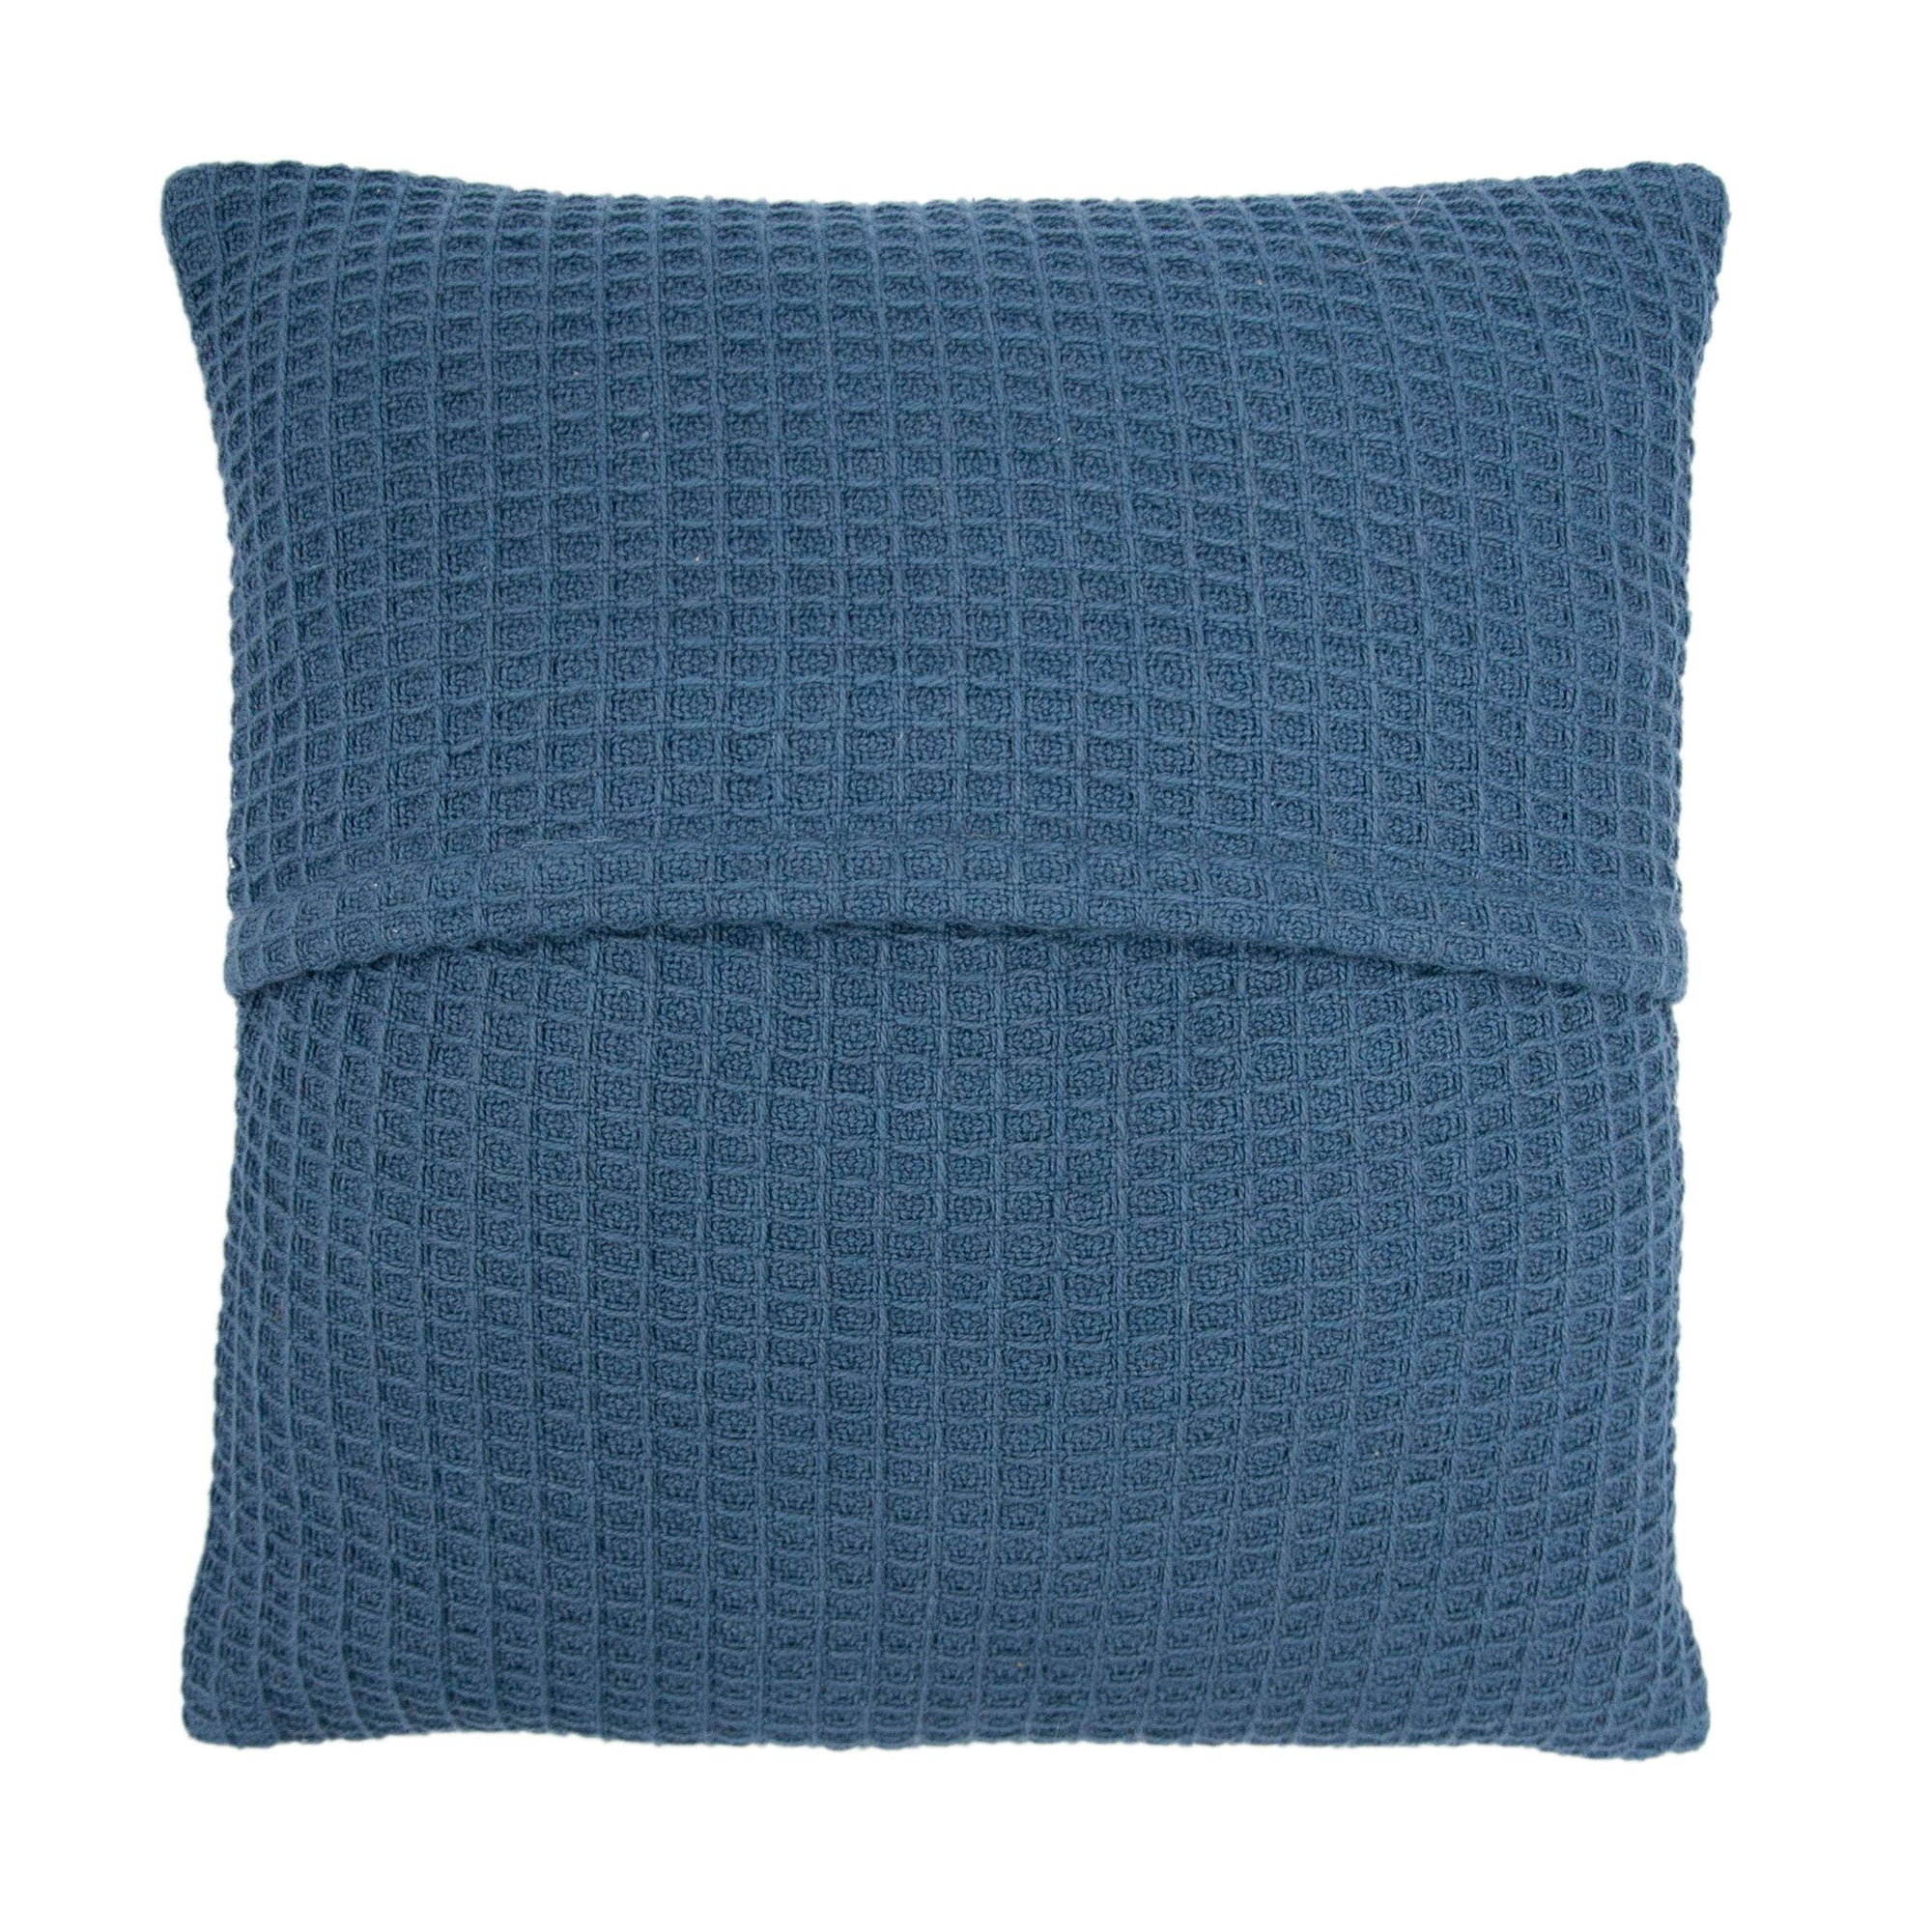 Bruges - Waffle Filled Cushion in Ink Blue - by Appletree Loft